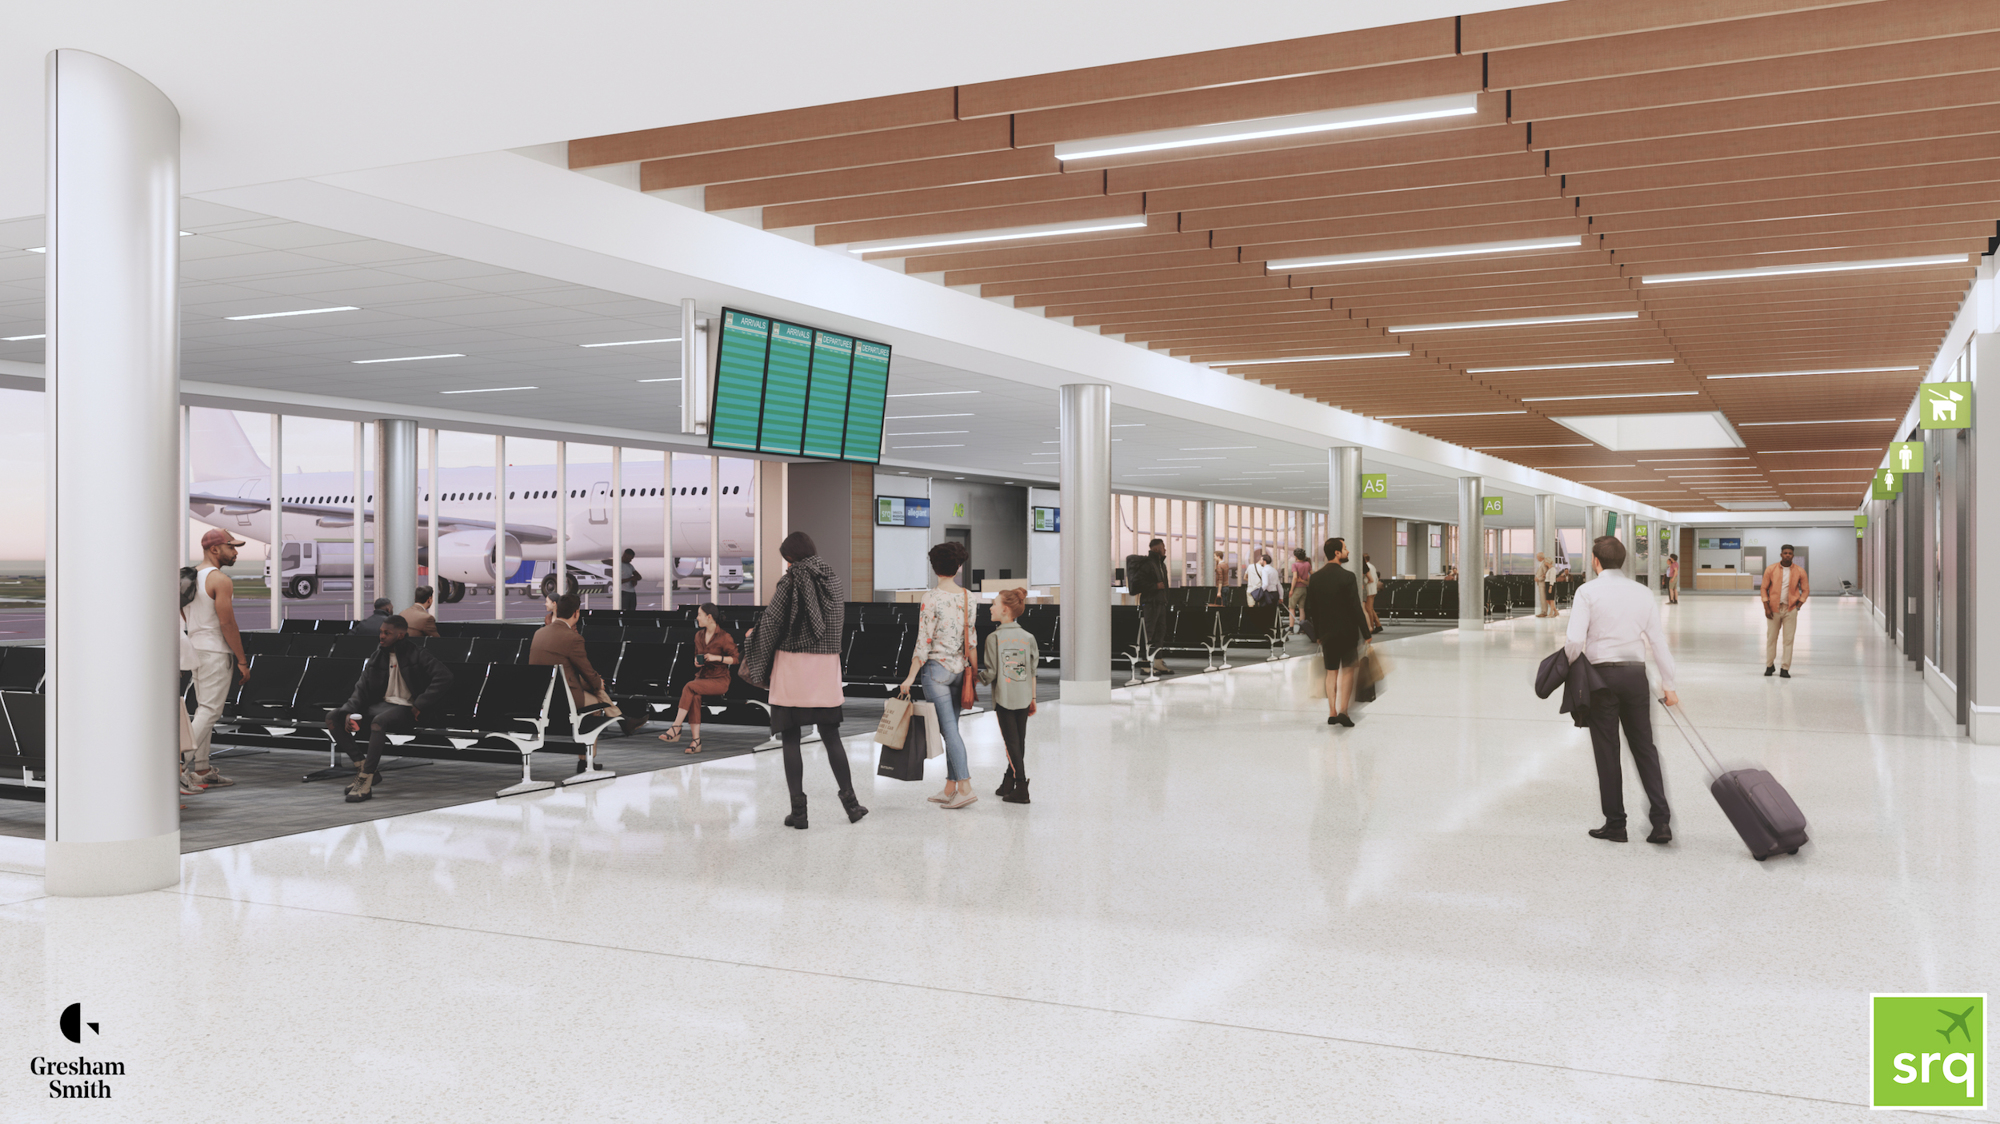 The passenger terminal expansion at Sarasota Bradenton International Airport will be a $72. million investment that will serve upwards of 2.5 million more passengers annually. (Courtesy rendering)